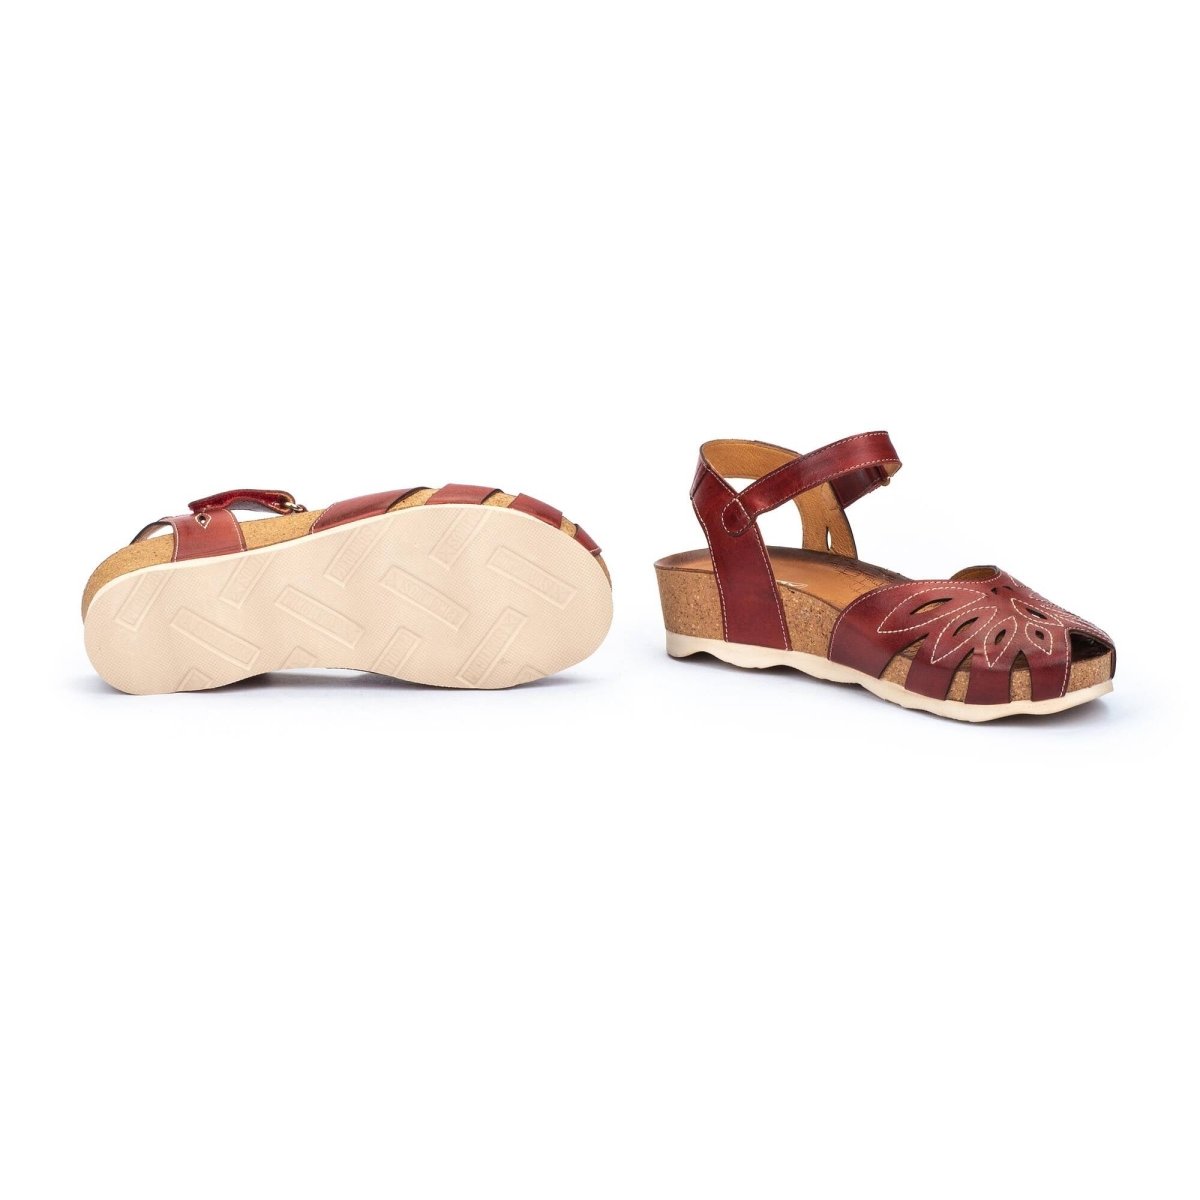 PIKOLINOS MAHON W9E-0682 SLINGBACK WEDGES SANDALS IN SANDIA - TLW Shoes